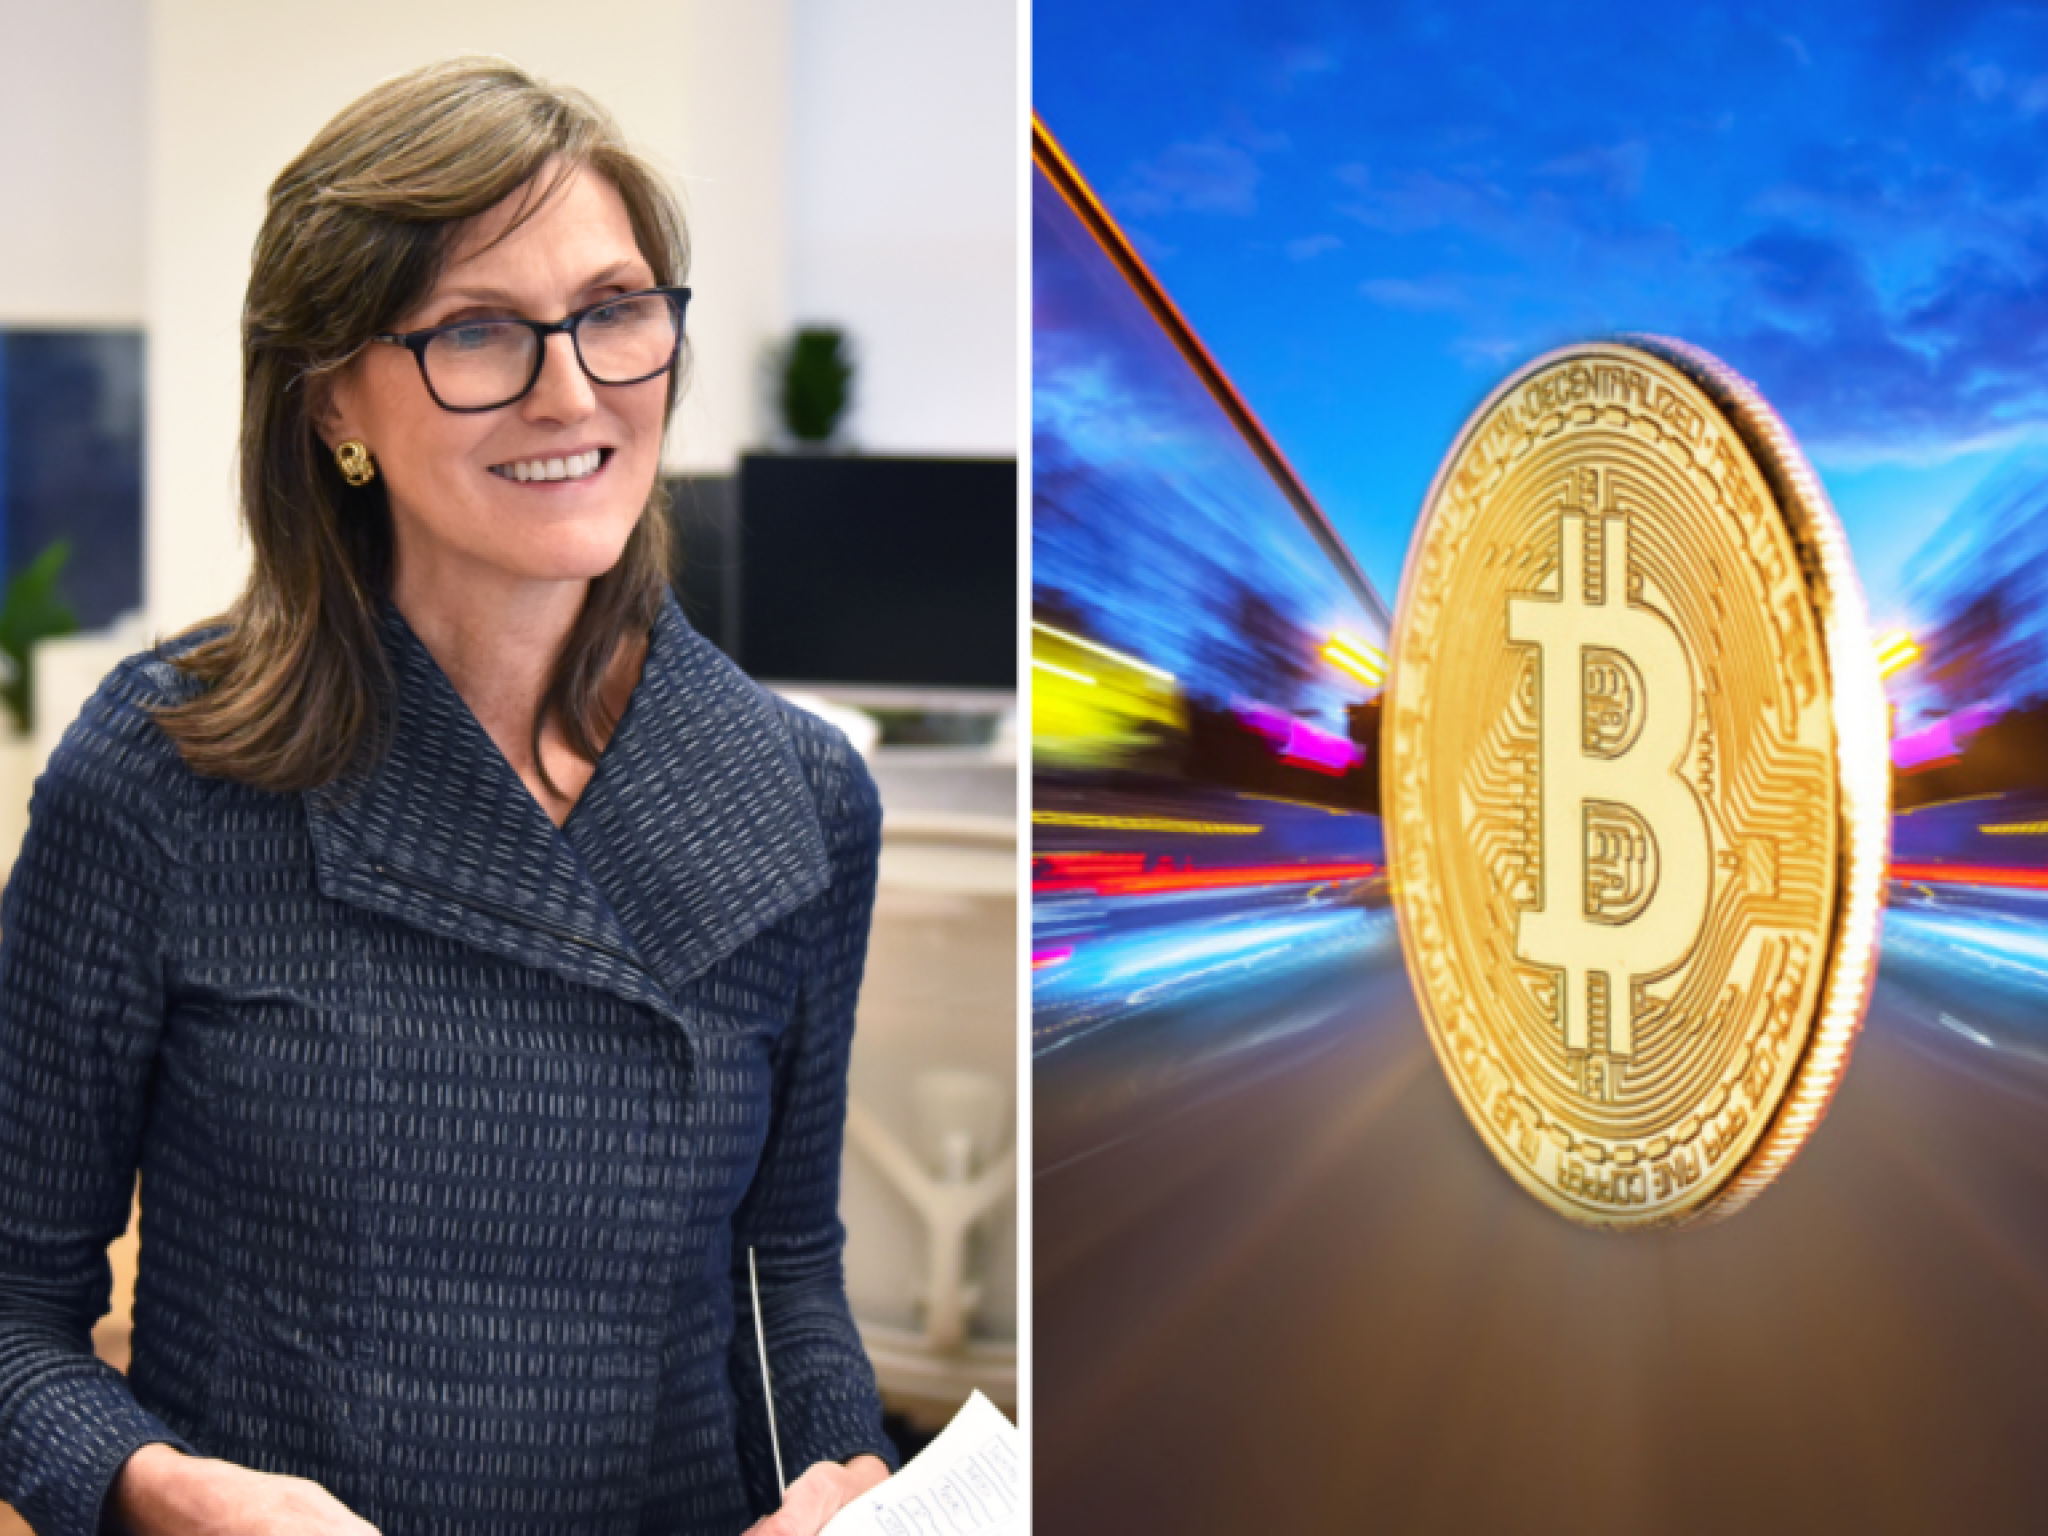  was-cathie-wood-right-about-crypto-as-an-issue-in-2024-white-house-race-you-cant-be-on-the-wrong-side-of-young-people-and-win-an-election 